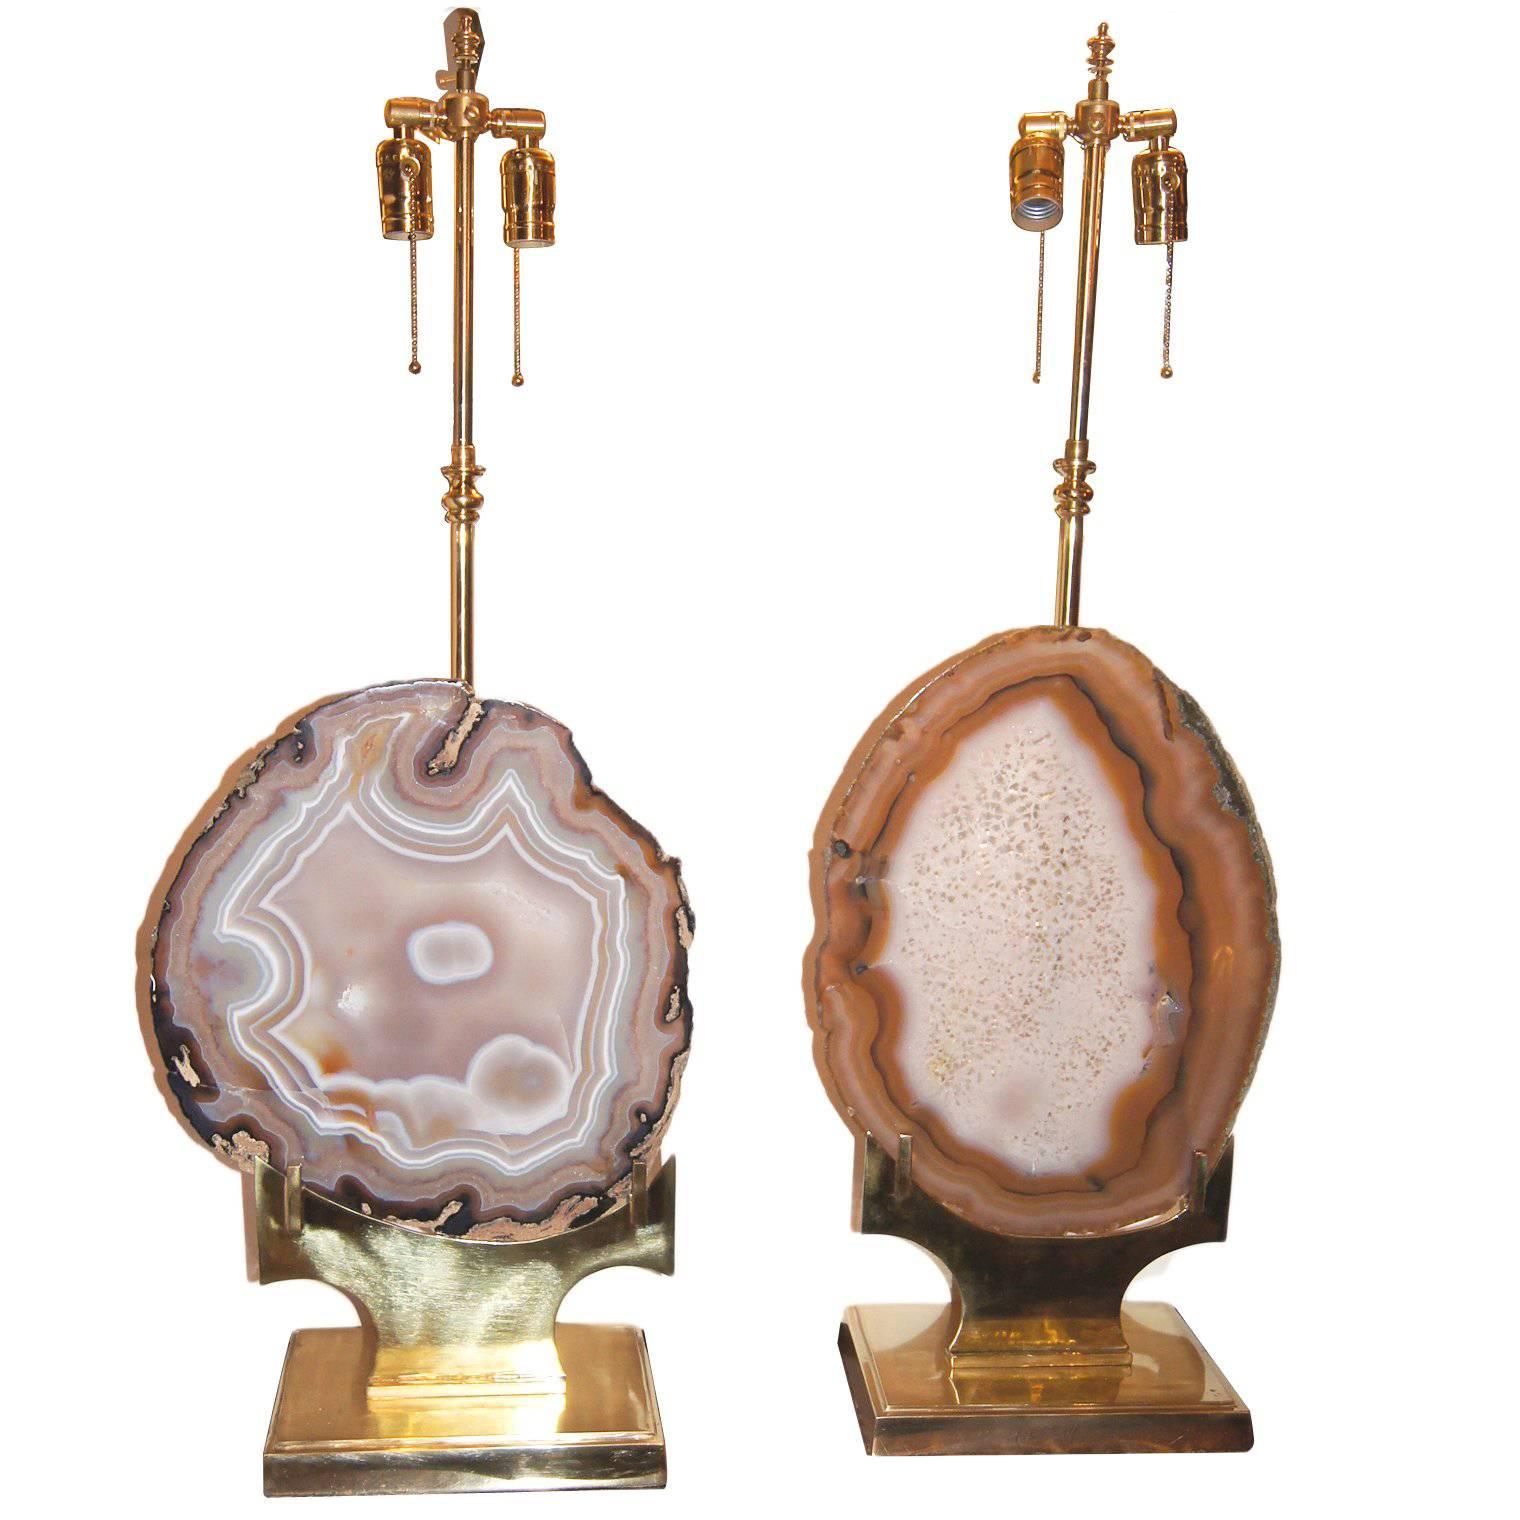 Matching pair of 1950s French table lamps with agathe inserts.

Measurements:
Height of body 26